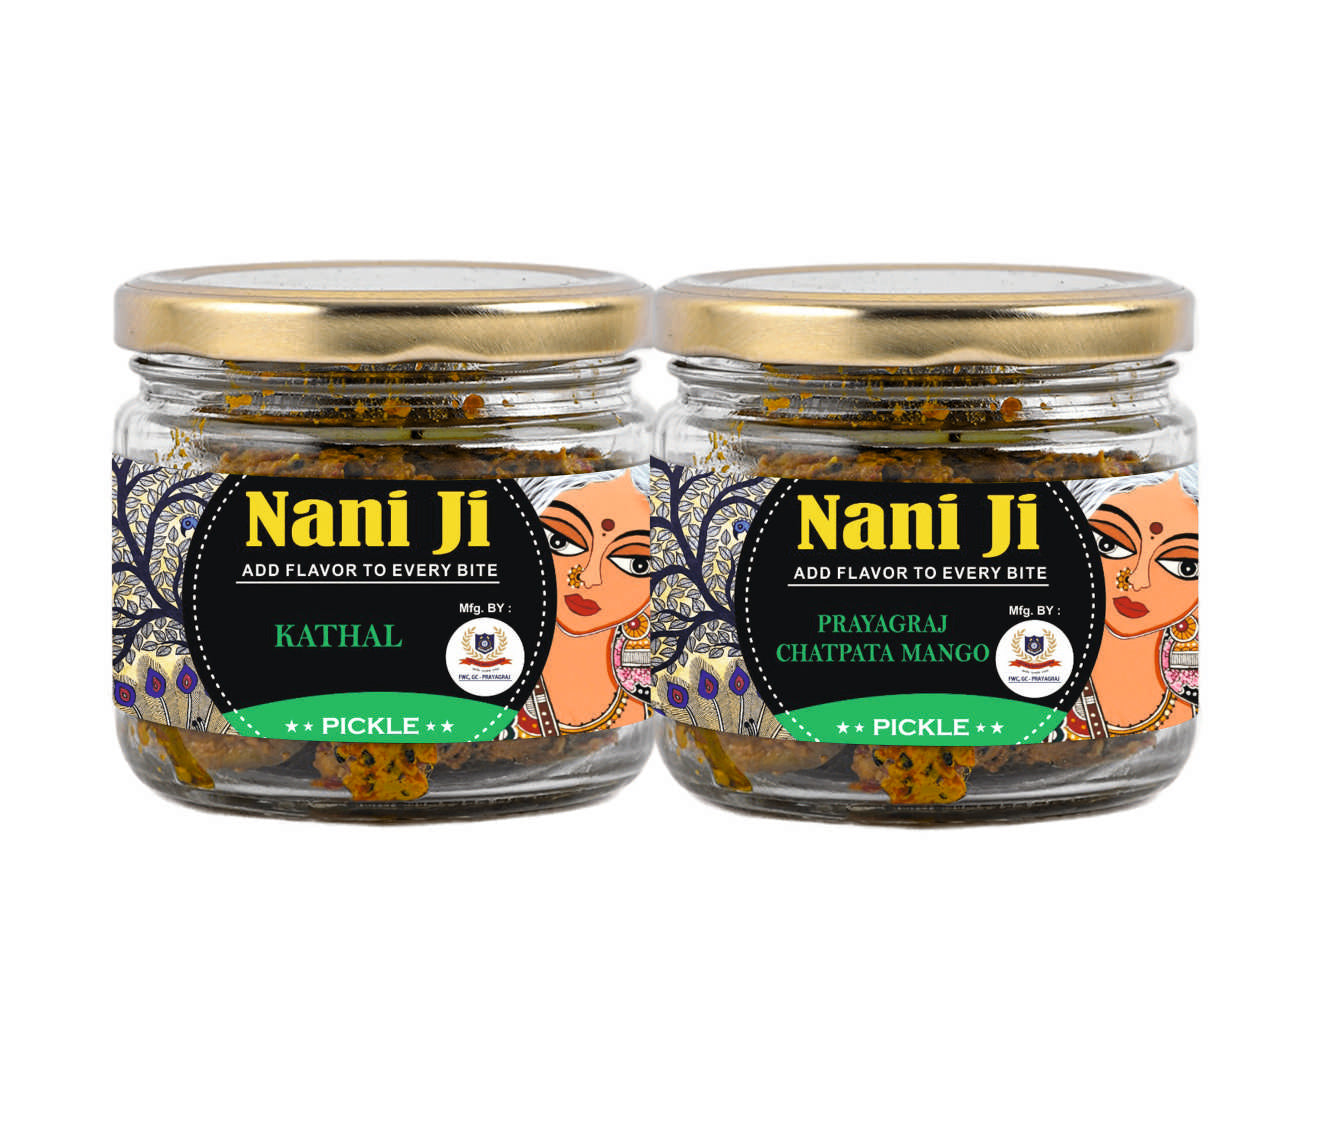 "Delicious Duo: Kathal and Mango Pickle Combo"